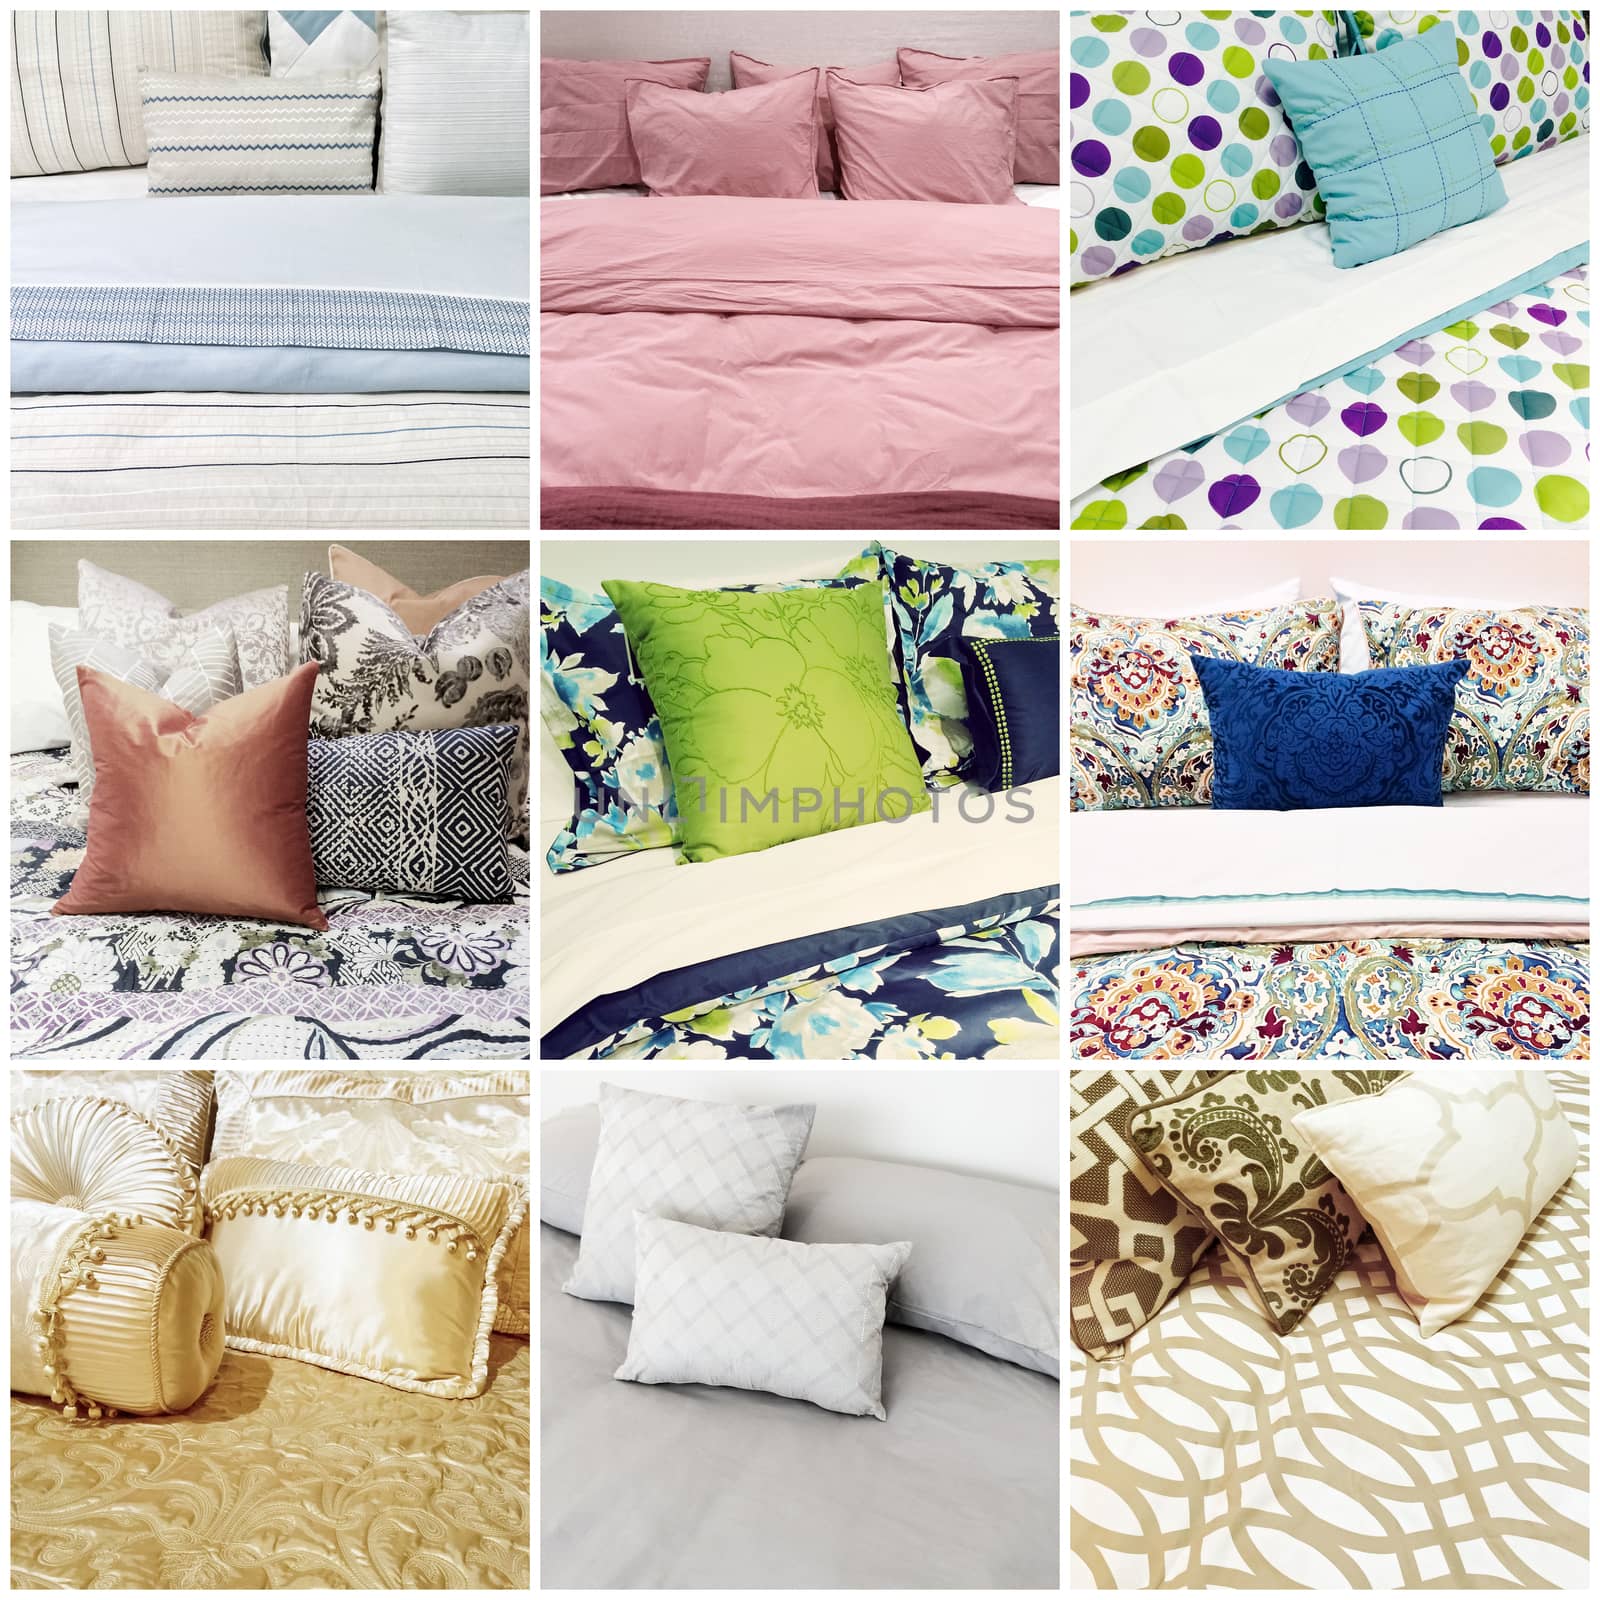 Beds with different styles of bed linen. Collage of nine photos.